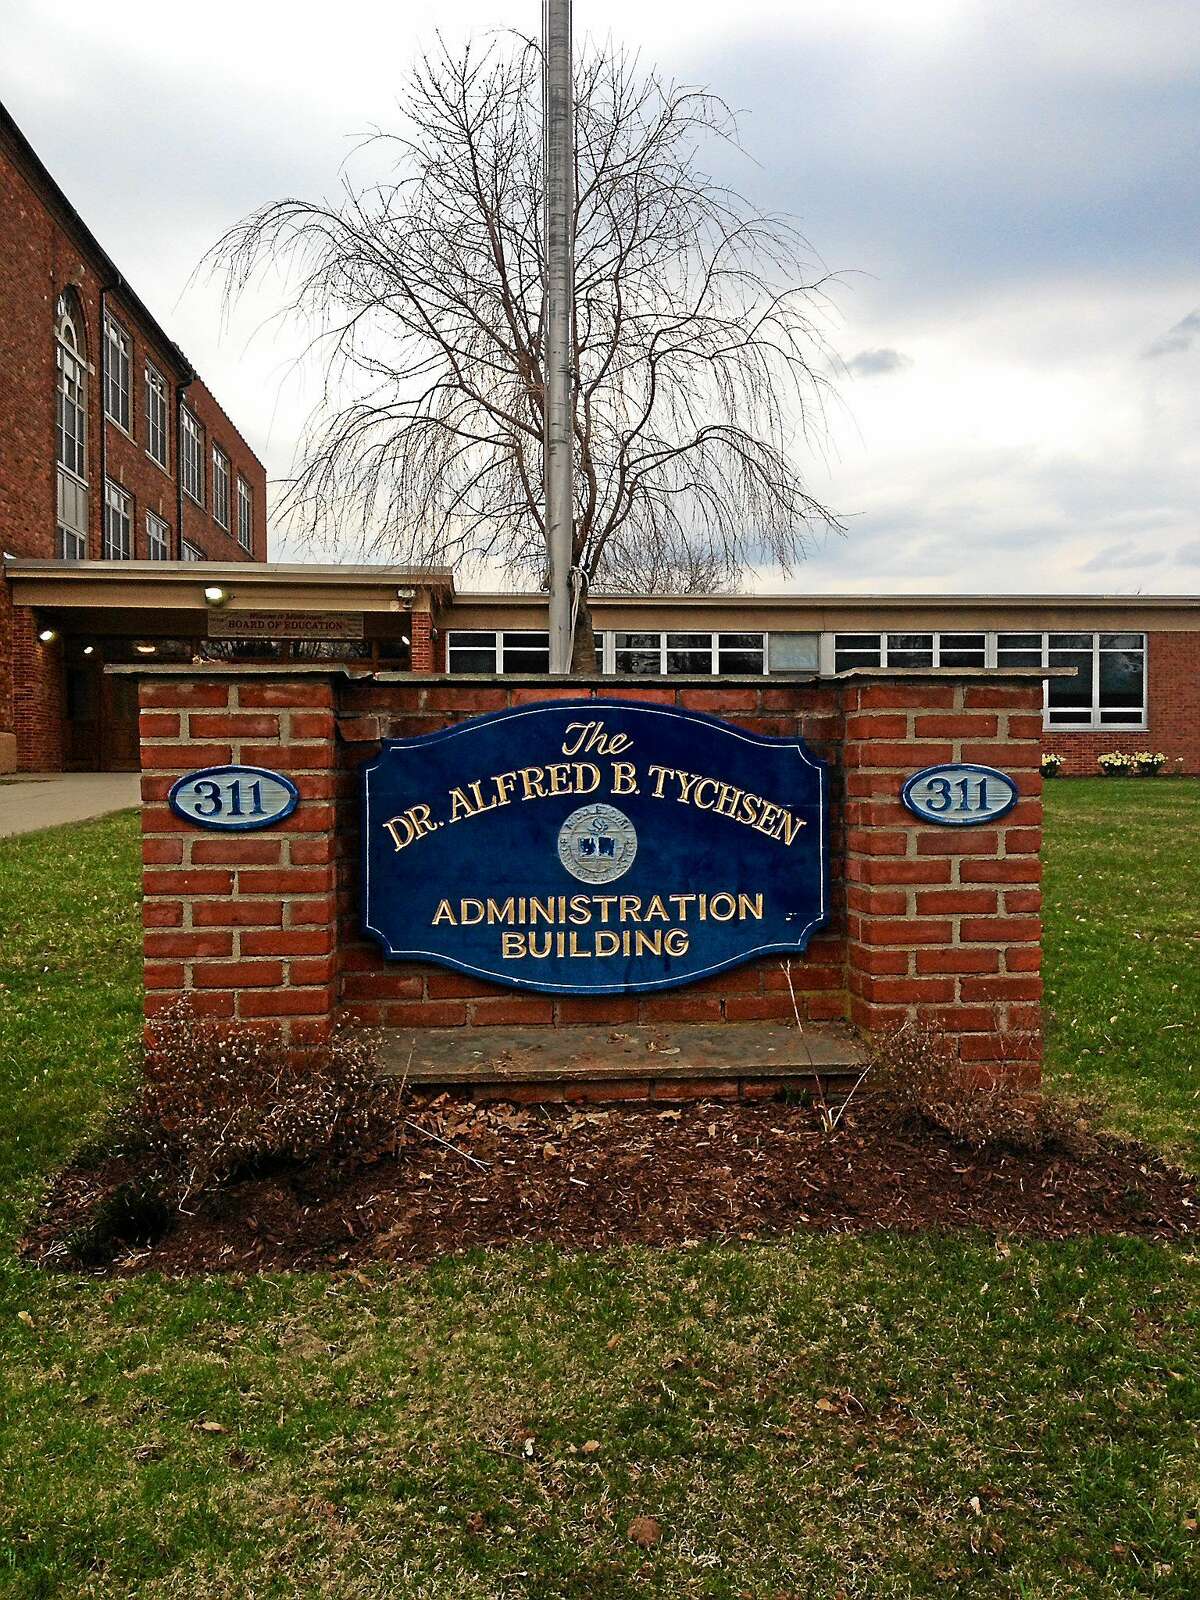 The Middletown Board of Education central office on Hunting Hill Avenue